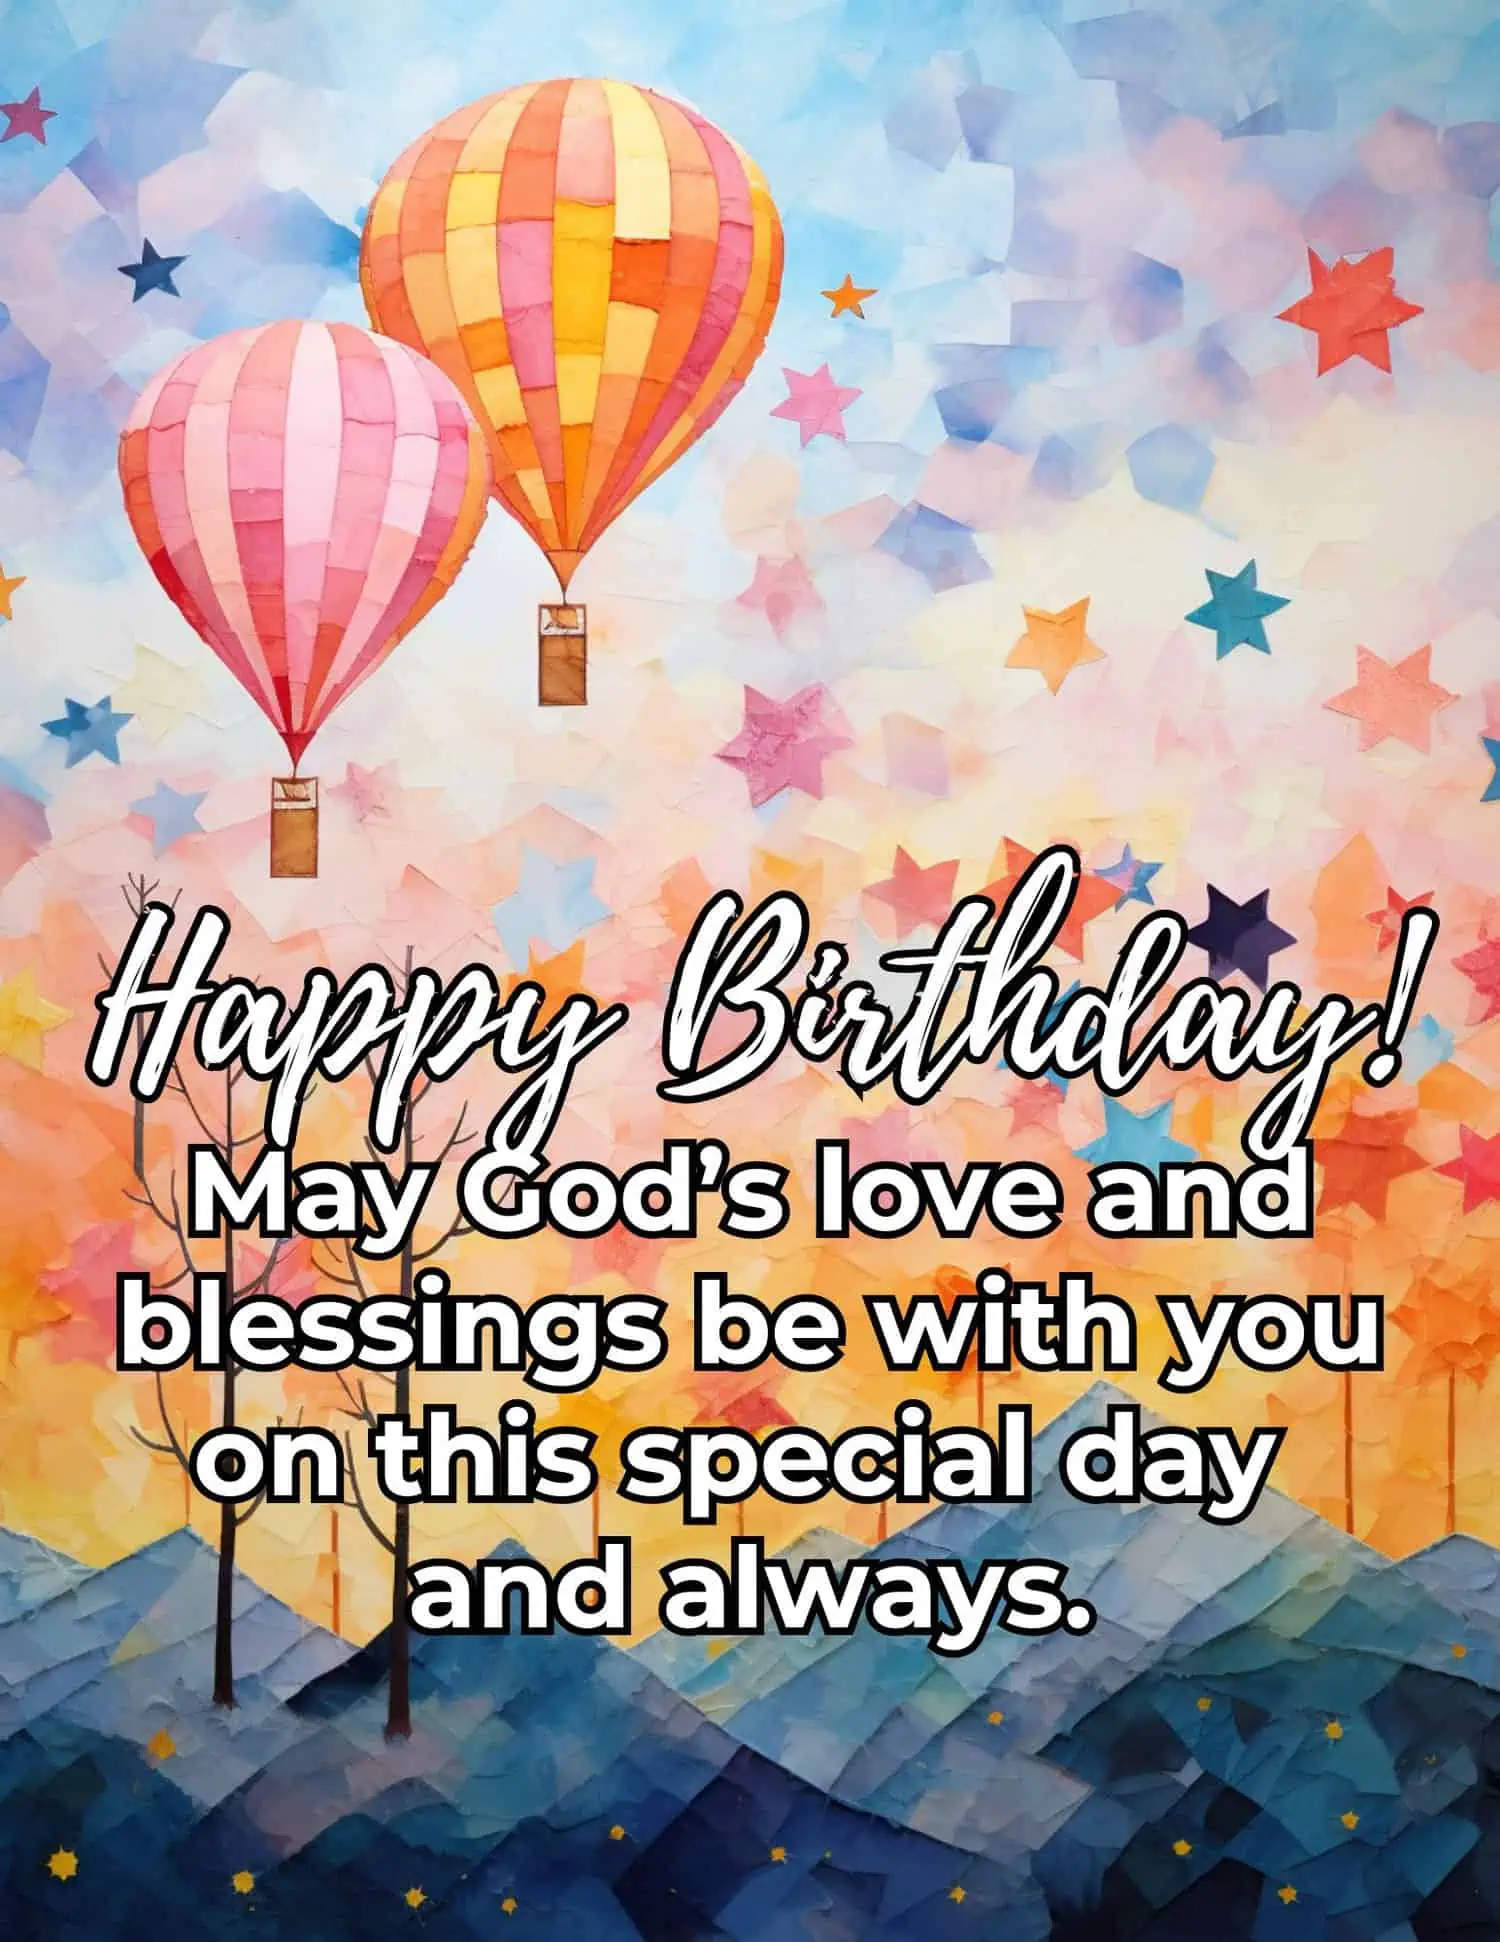 A collection of meaningful and spiritual birthday wishes for a child's third birthday, incorporating elements of faith, blessings, and prayers for a life filled with grace and love.